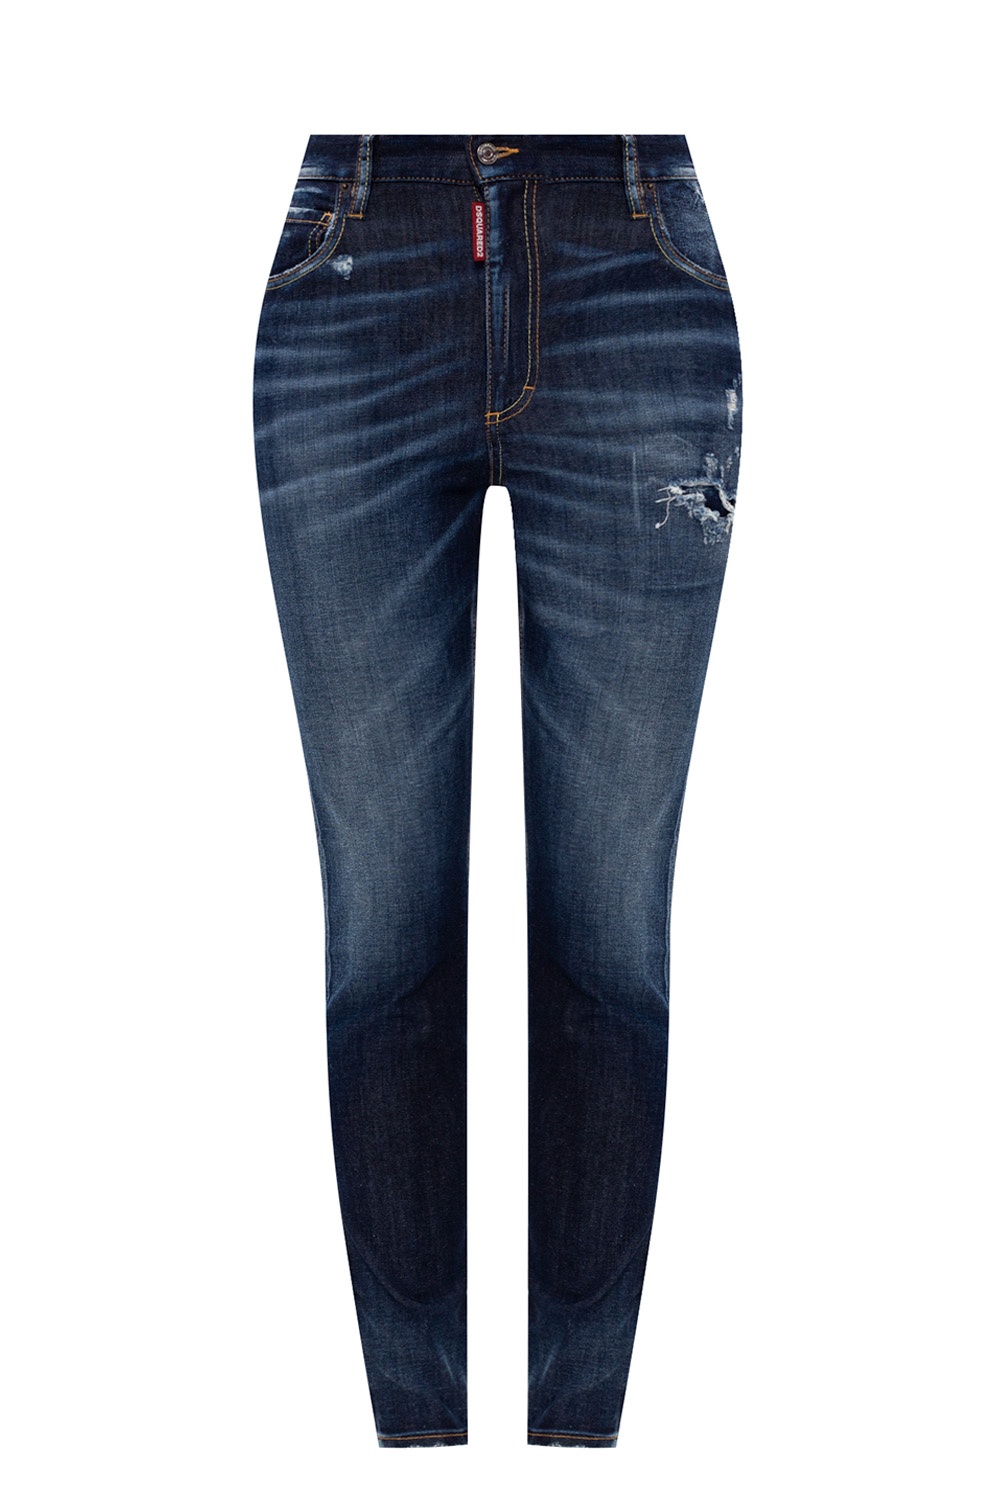 dsquared twiggy jeans